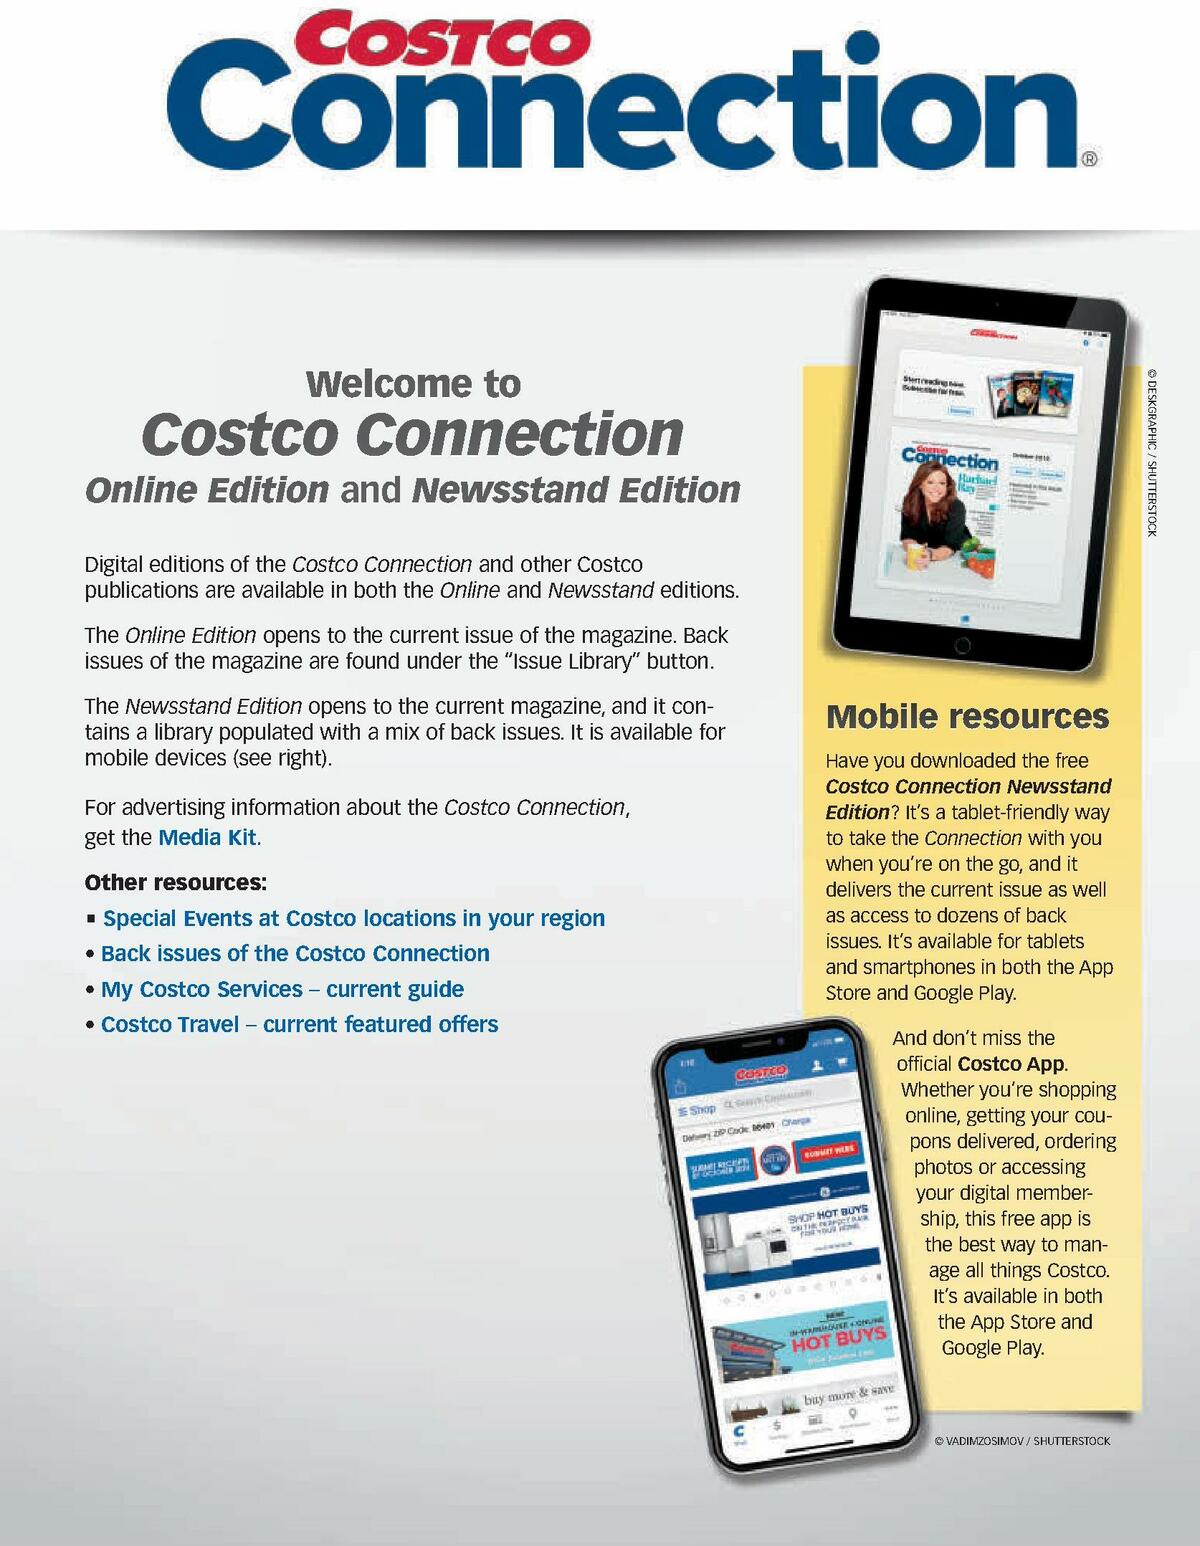 Costco Connection April Weekly Ad from April 1